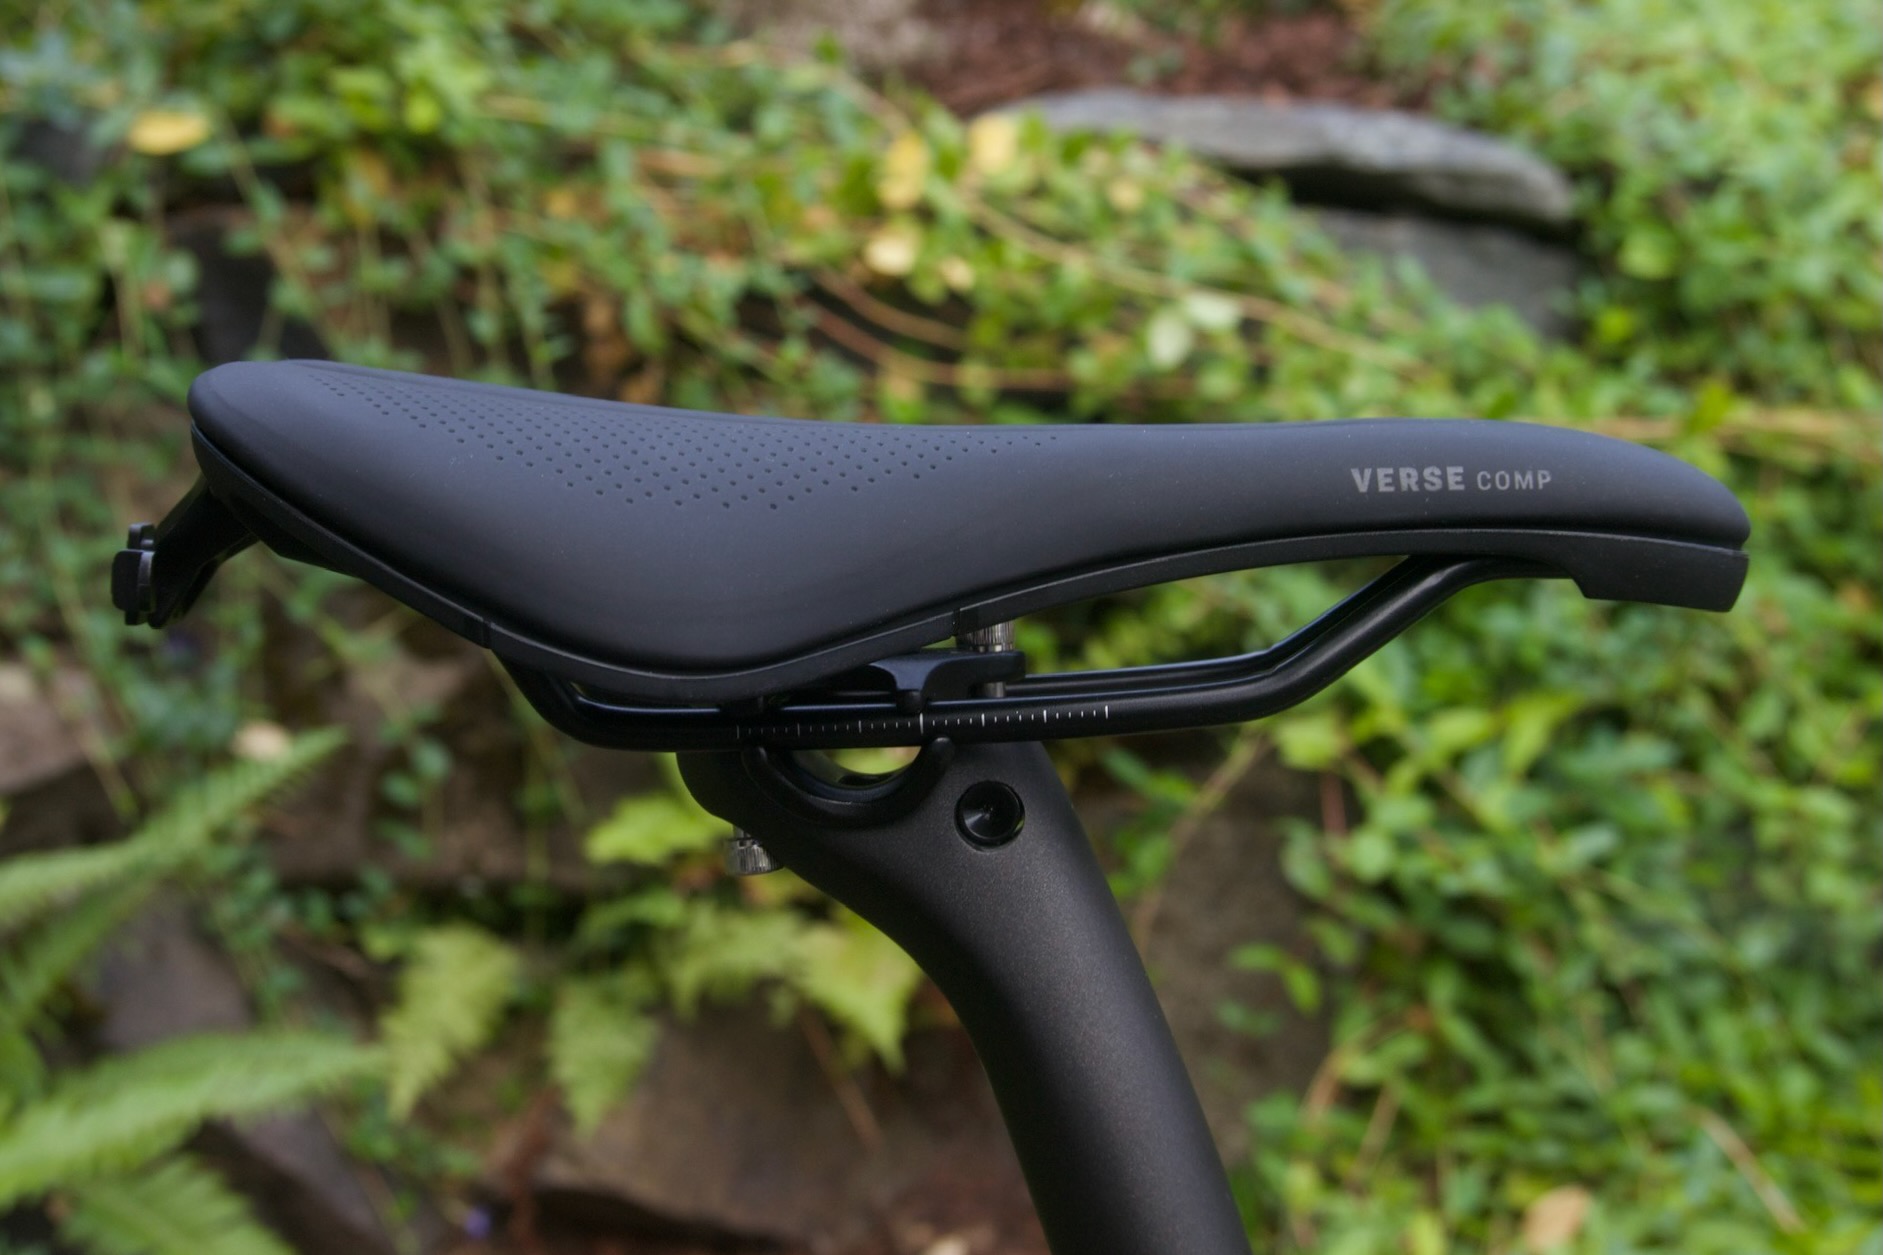 A side view of the Bontrager Verse Comp road bike saddle that shows the adjustment markings on the rails